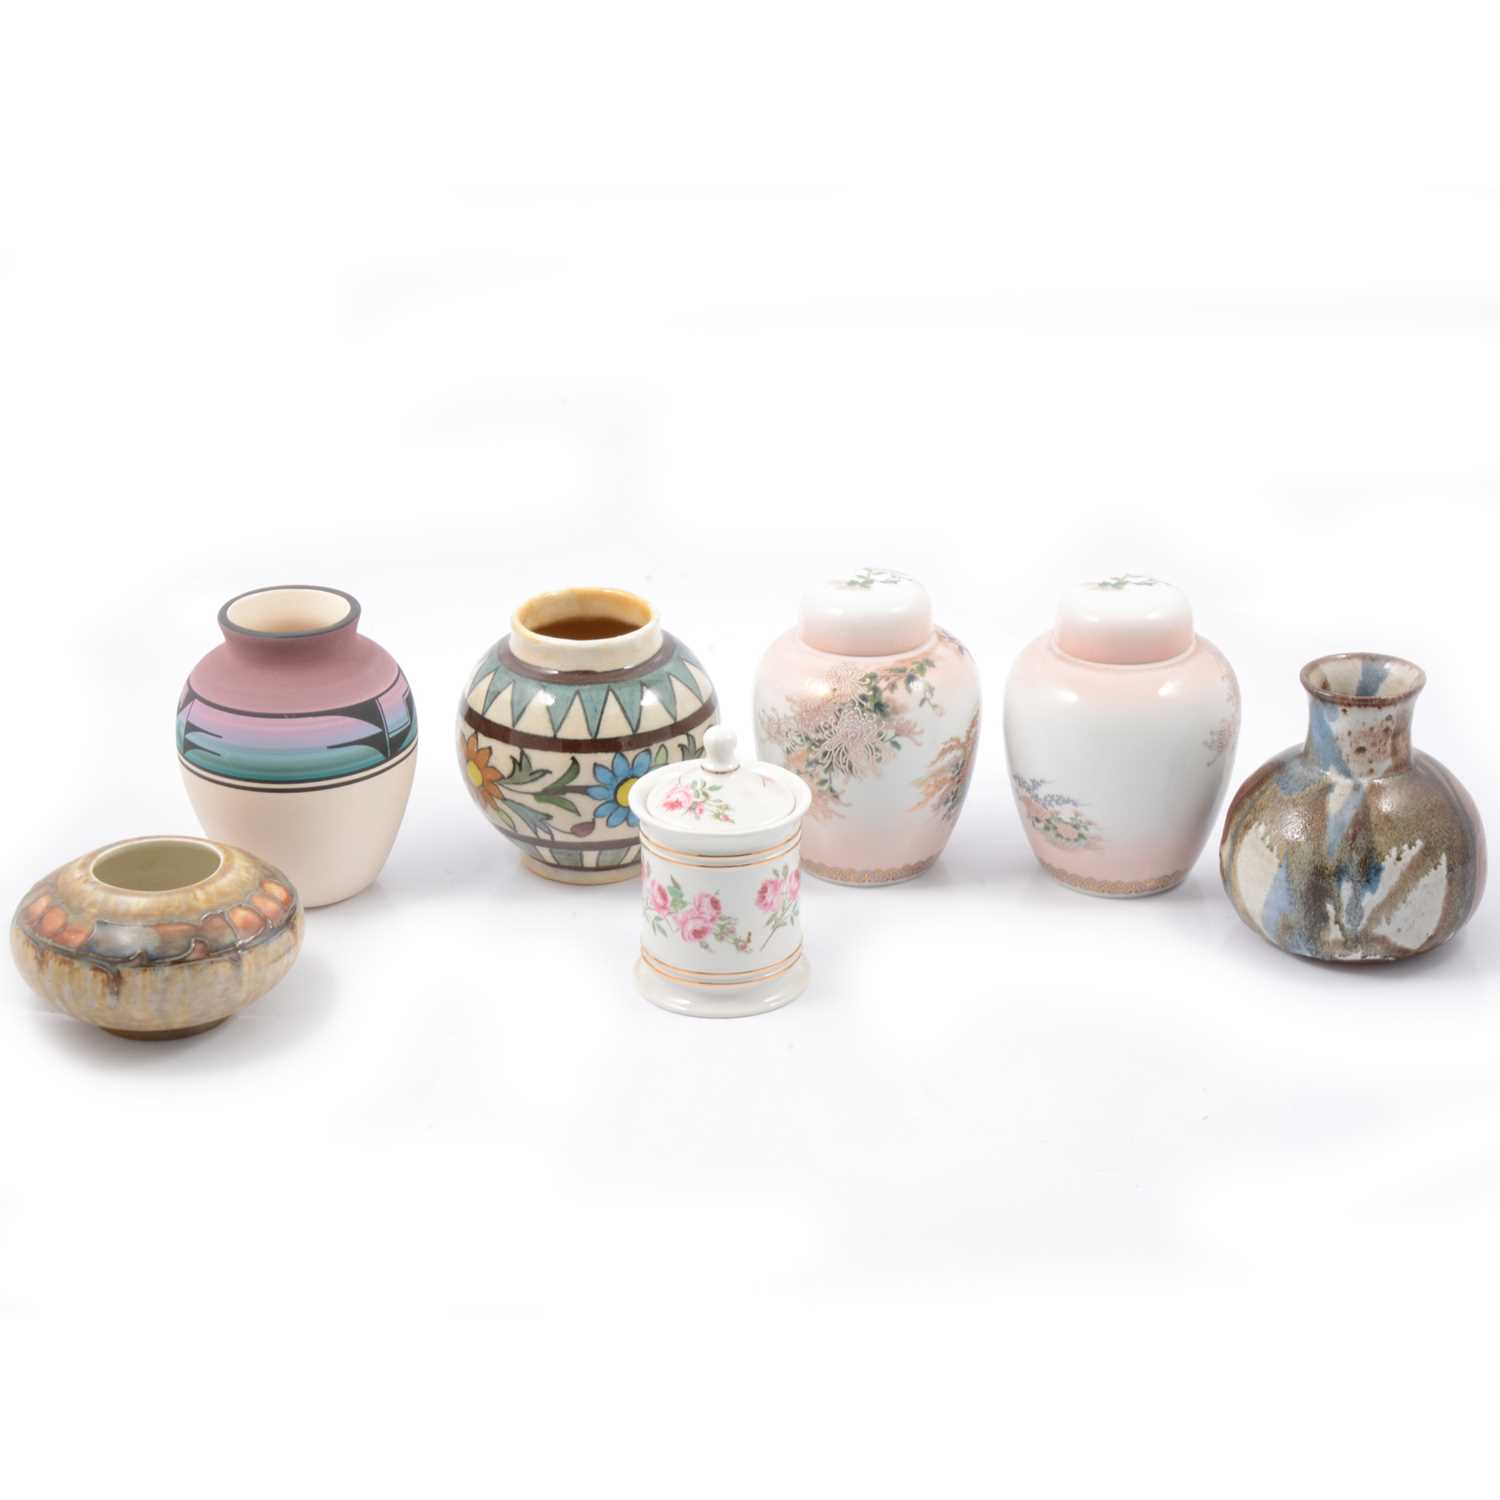 Lot 37 - Cranston Pottery squat vase and other vases and ginger jars.